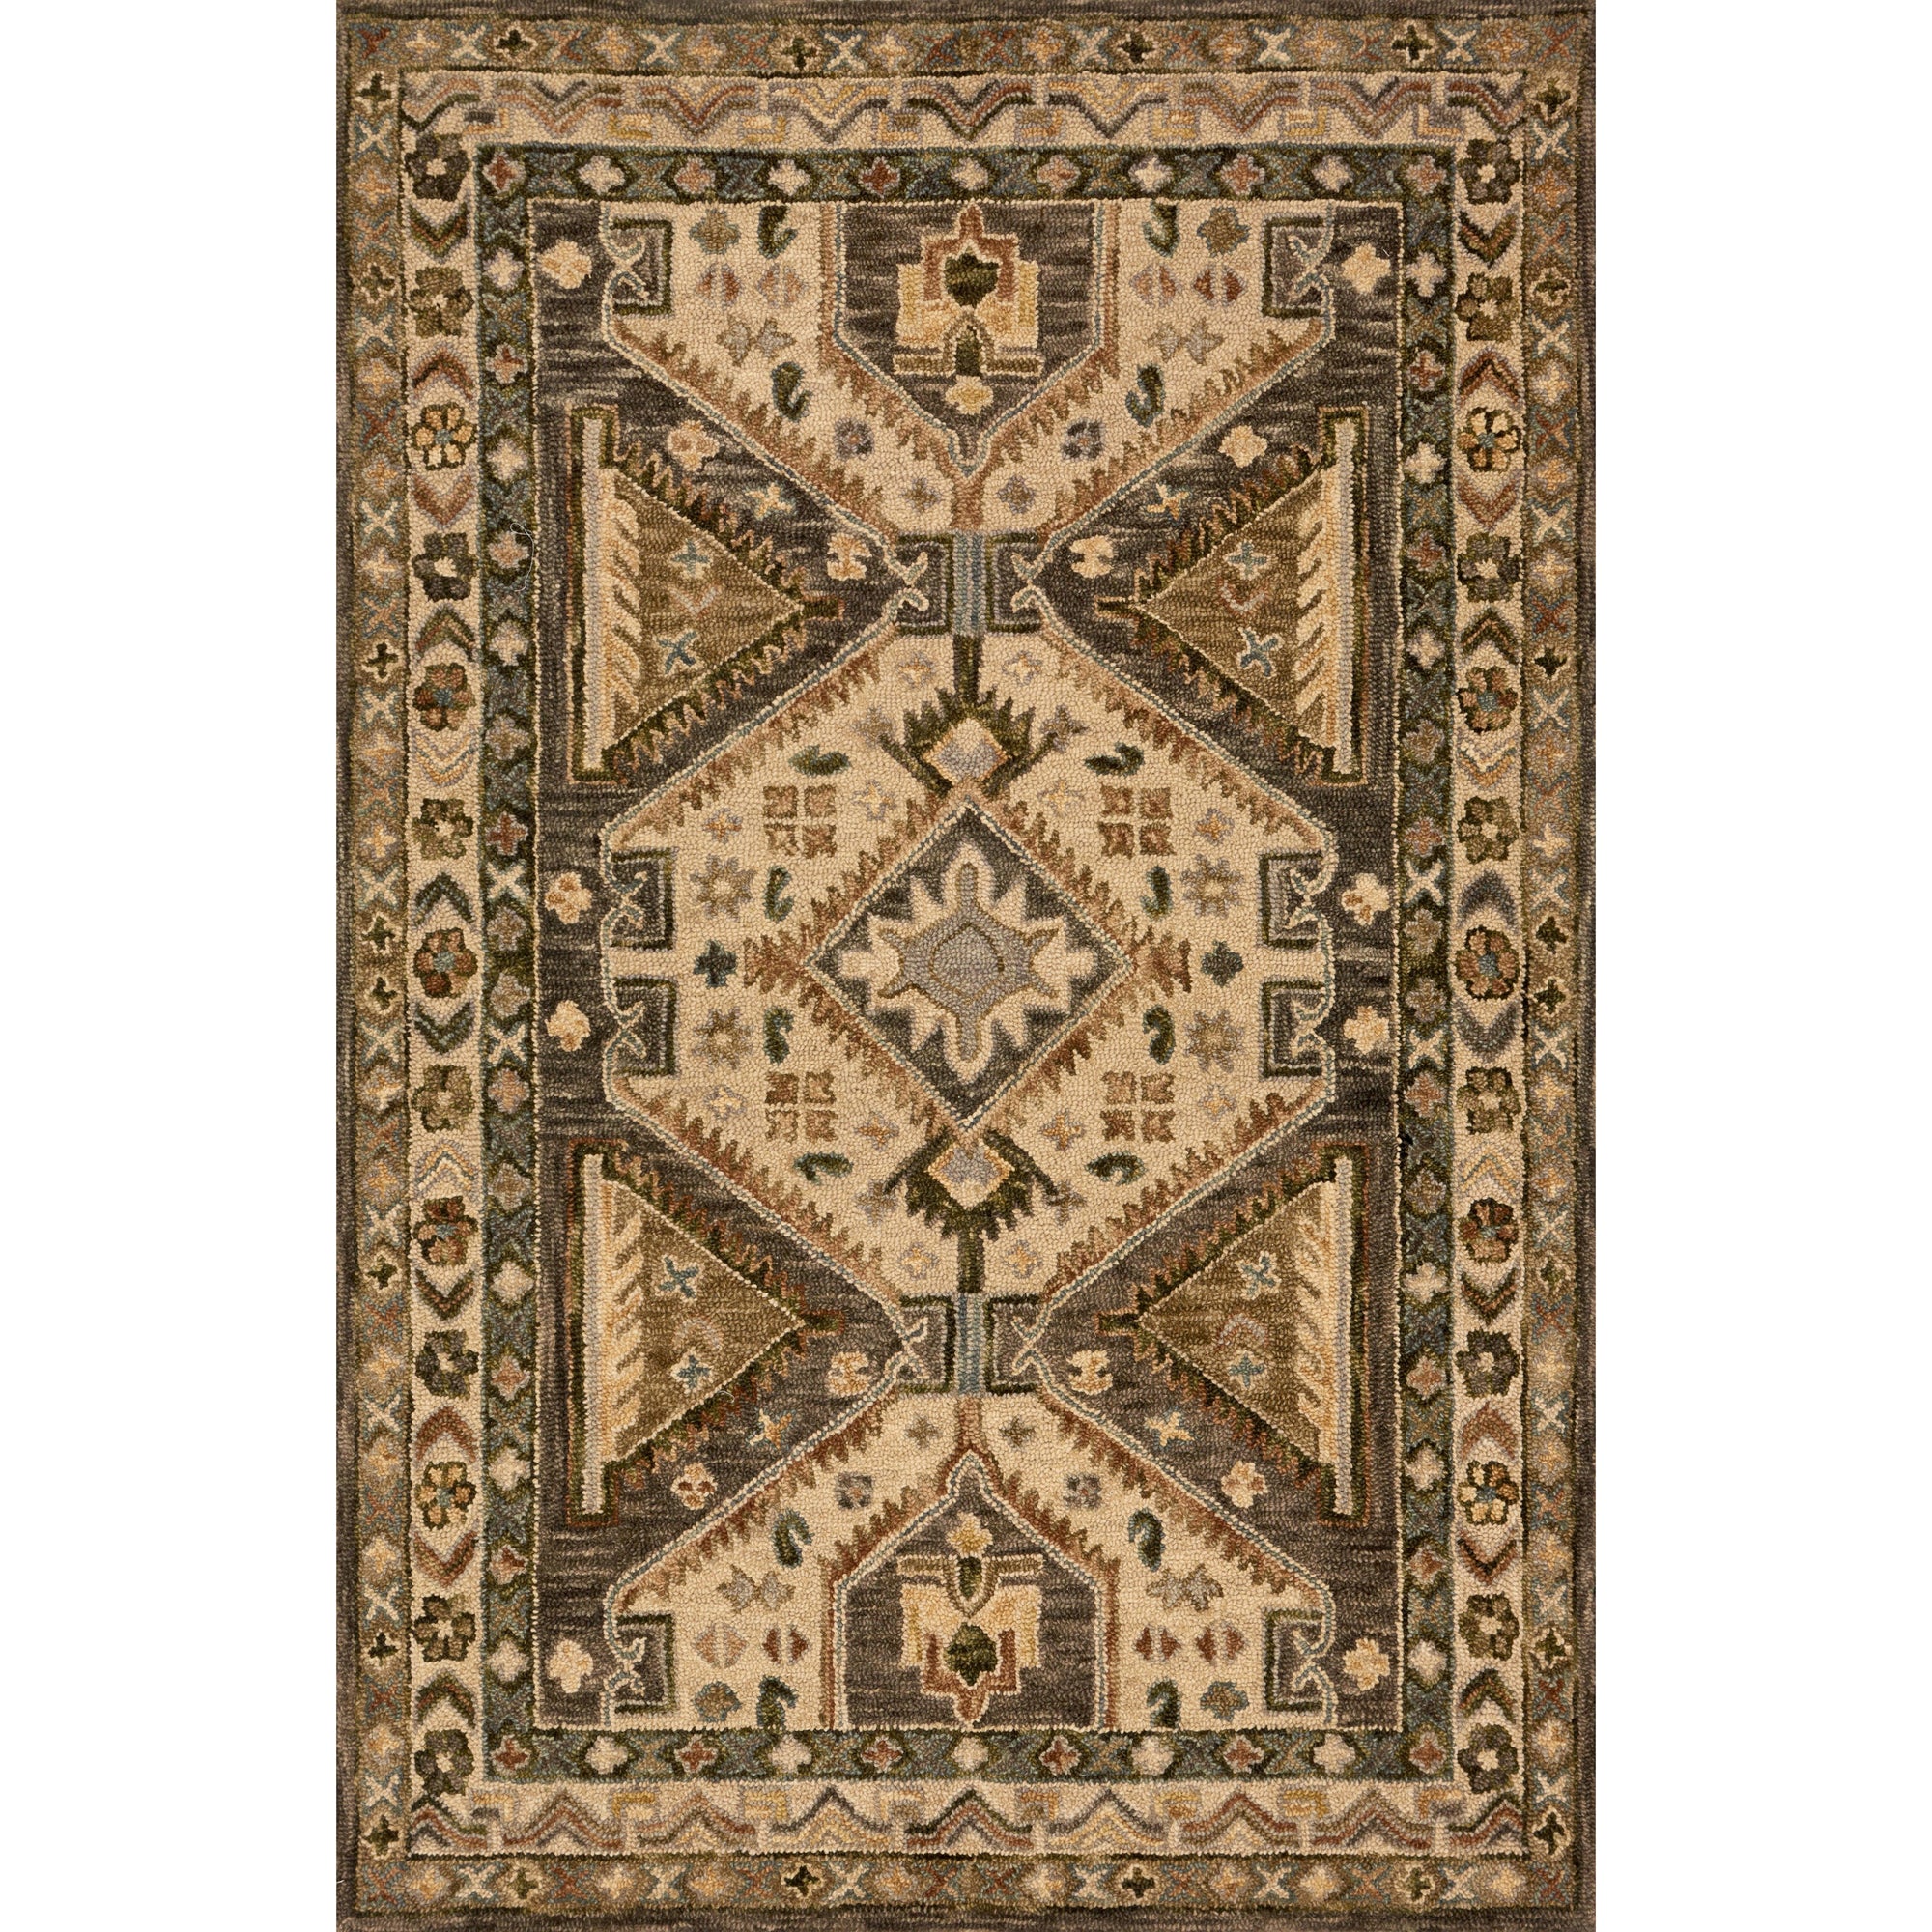 Rugs by Roo Loloi Victoria Walnut Beige Area Rug in size 18" x 18" Sample